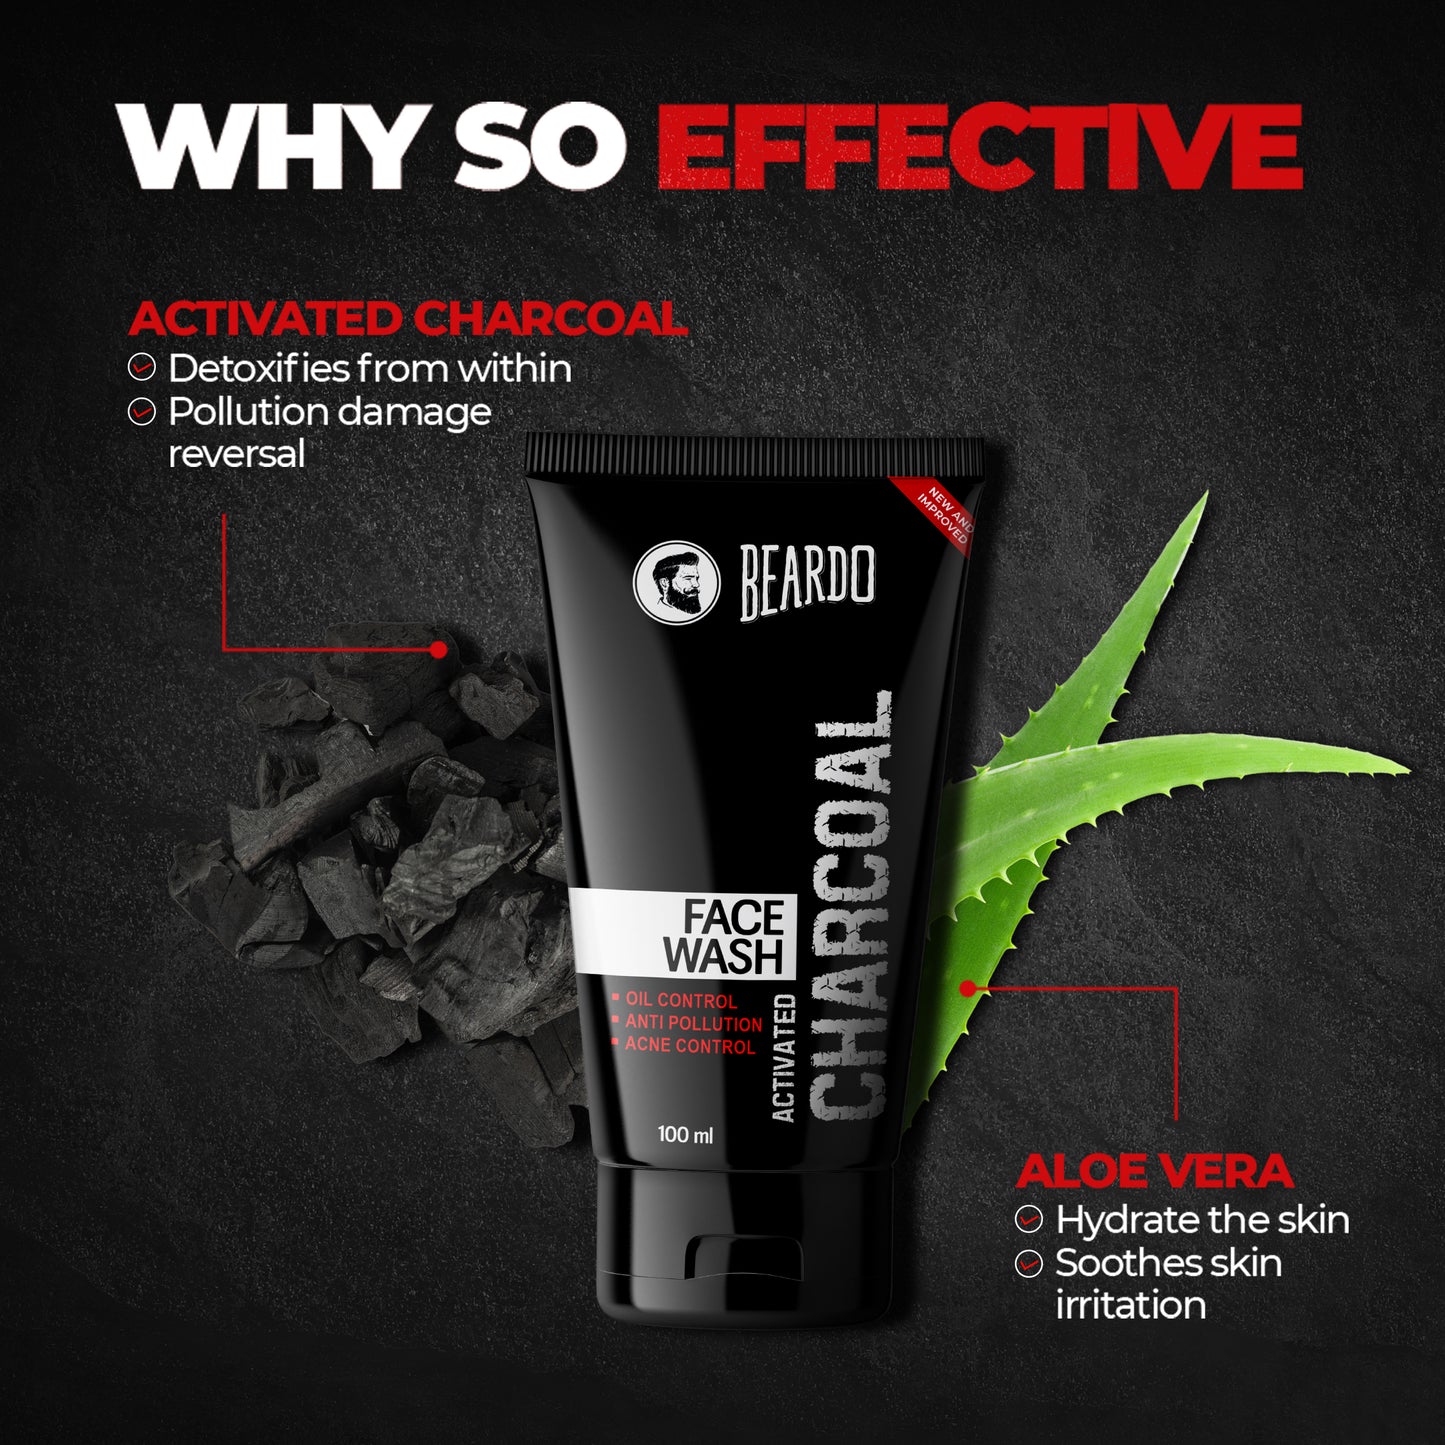 activated charcoal, skin detox, aloe vera, hydration, soothing skin